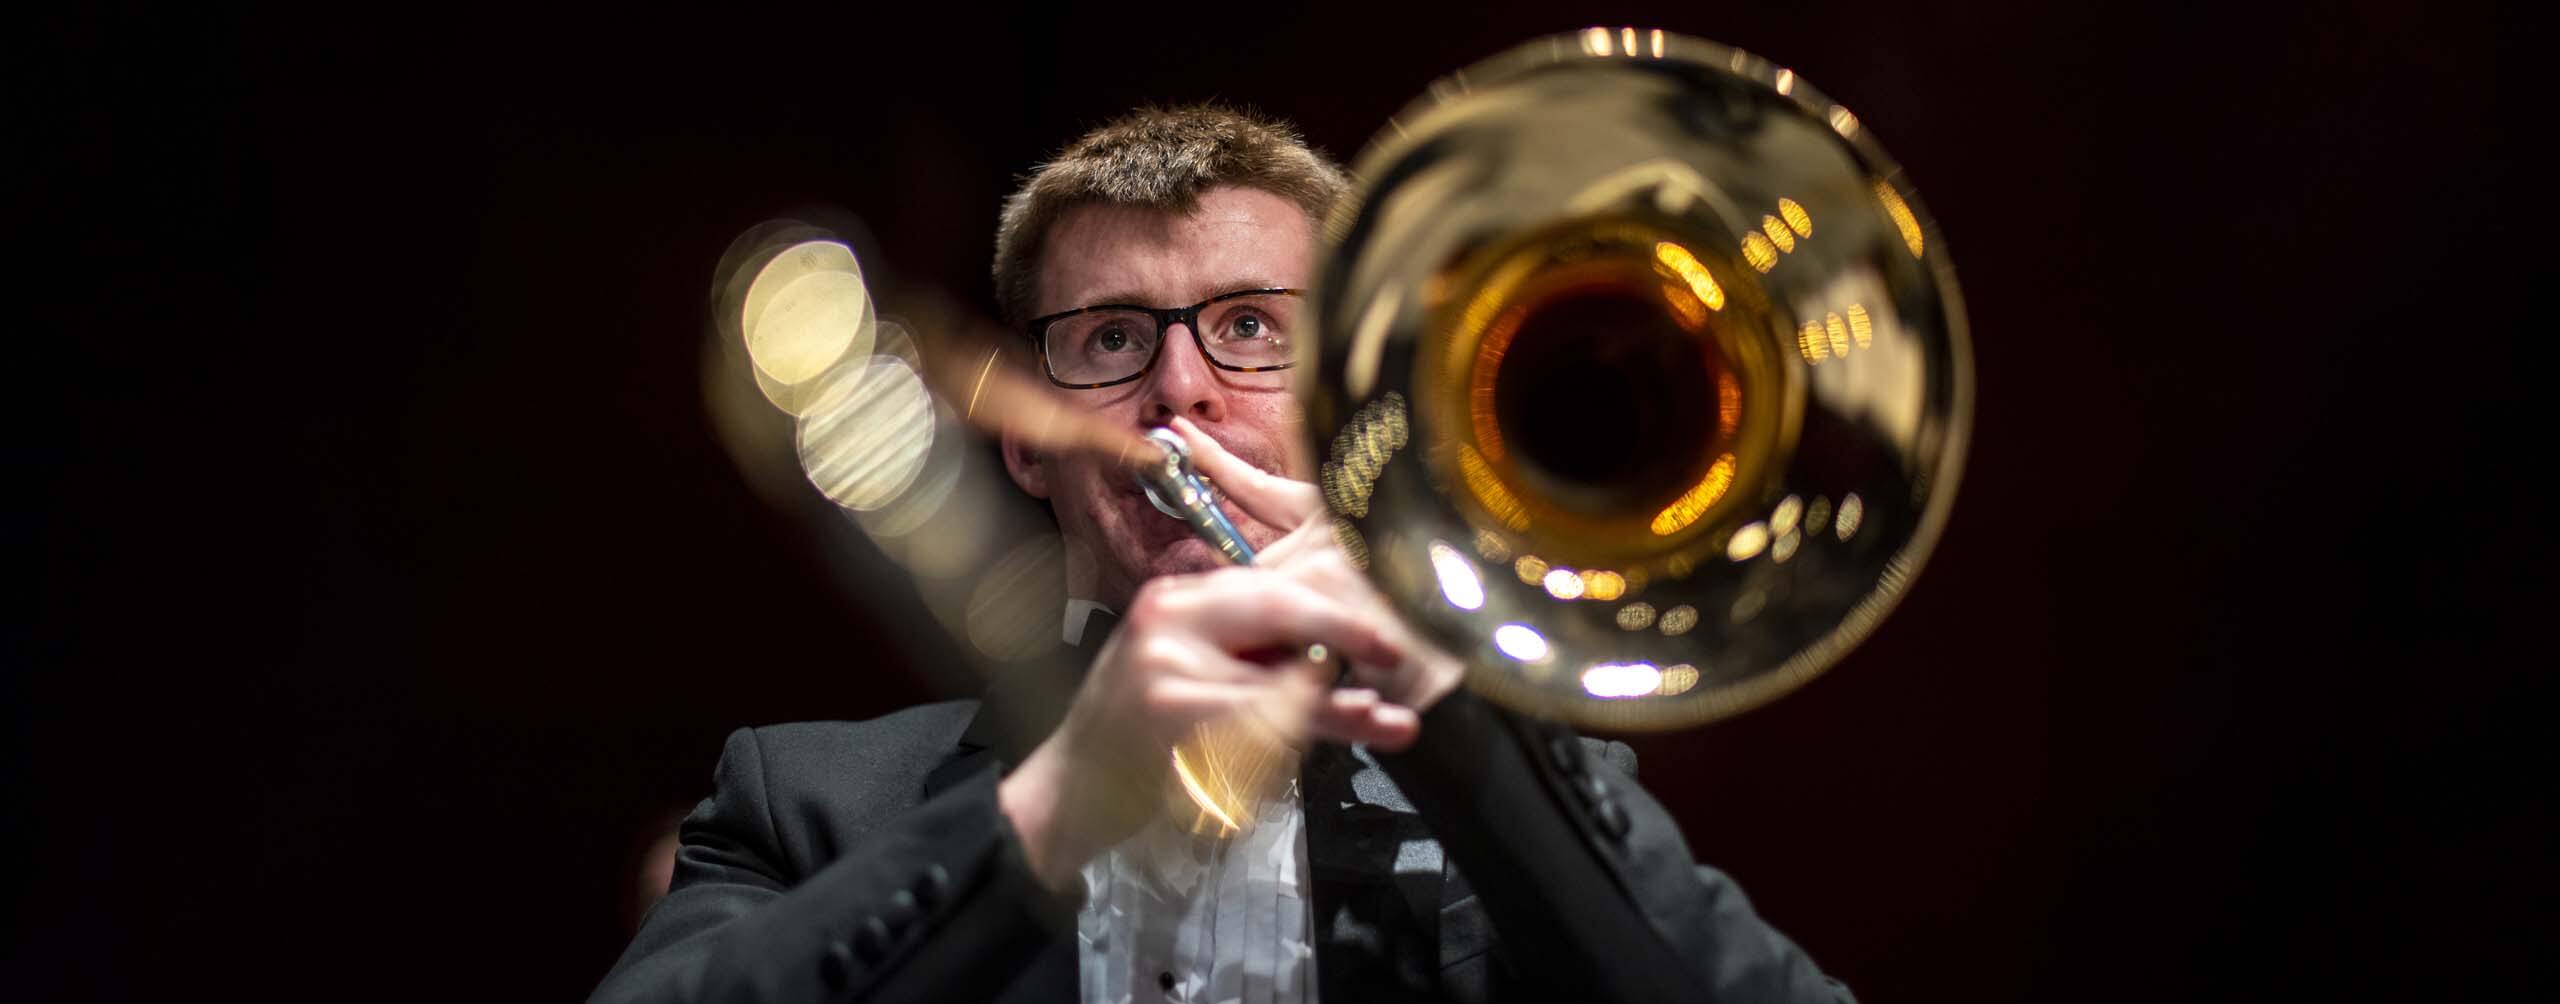 A photo of a music student playing a trombone